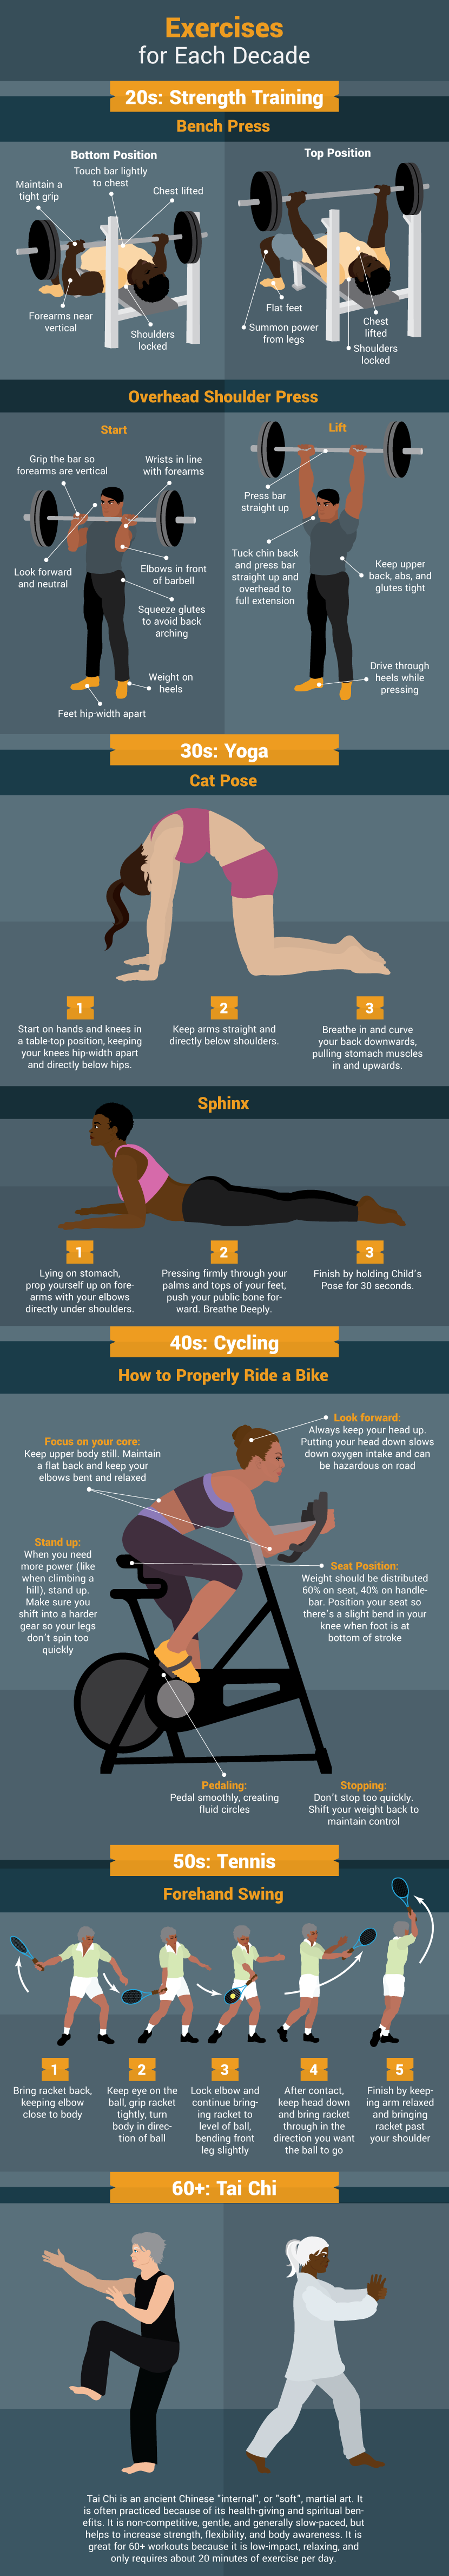 Exercise For Each Decade - Workouts for Each Phase of Life